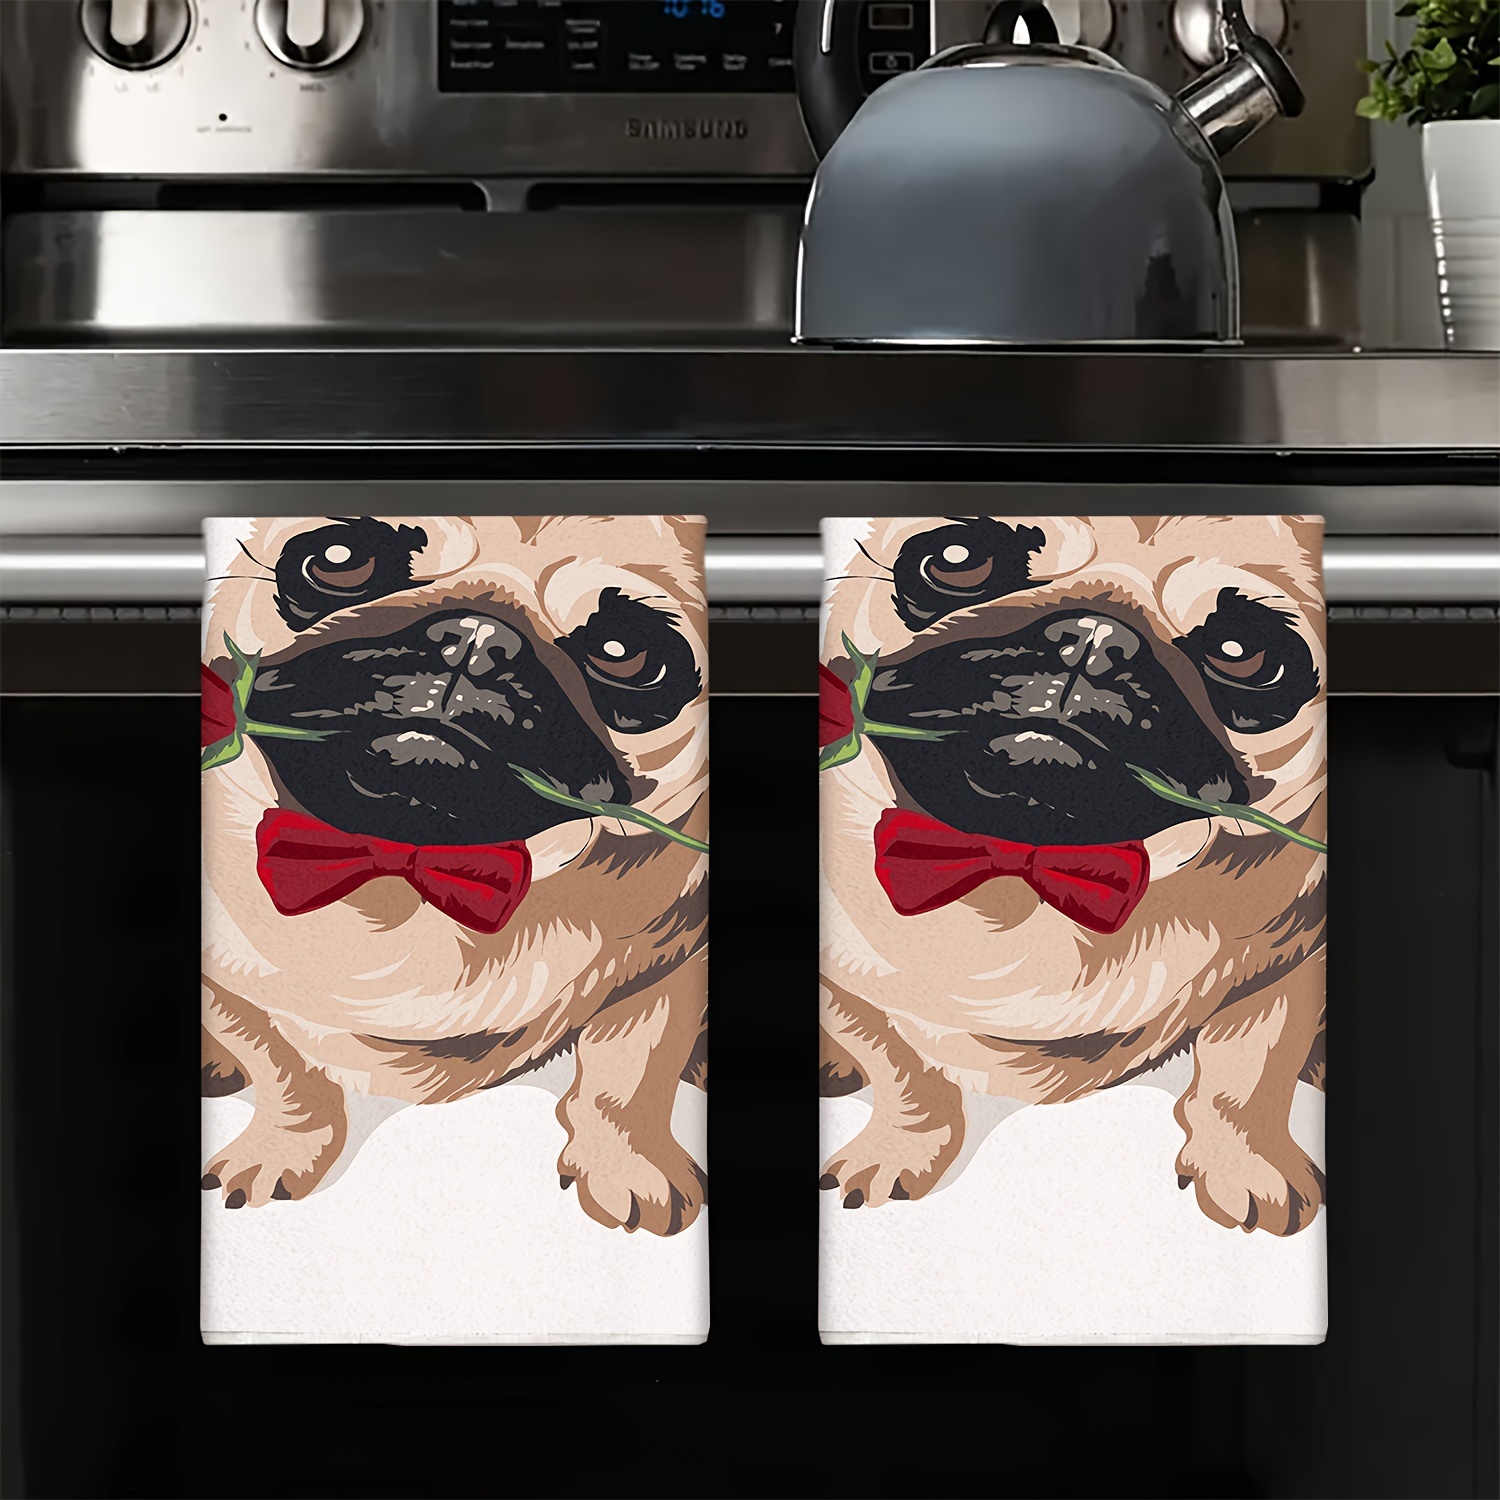 

Contemporary Microfiber Kitchen Towels Set Of 2 - Animal Themed Pug Dog Design With Red Bow - Ultra Fine Knit Fabric Dish Cloths - Machine Washable, Water Absorbable & Super Soft Cleaning Towels